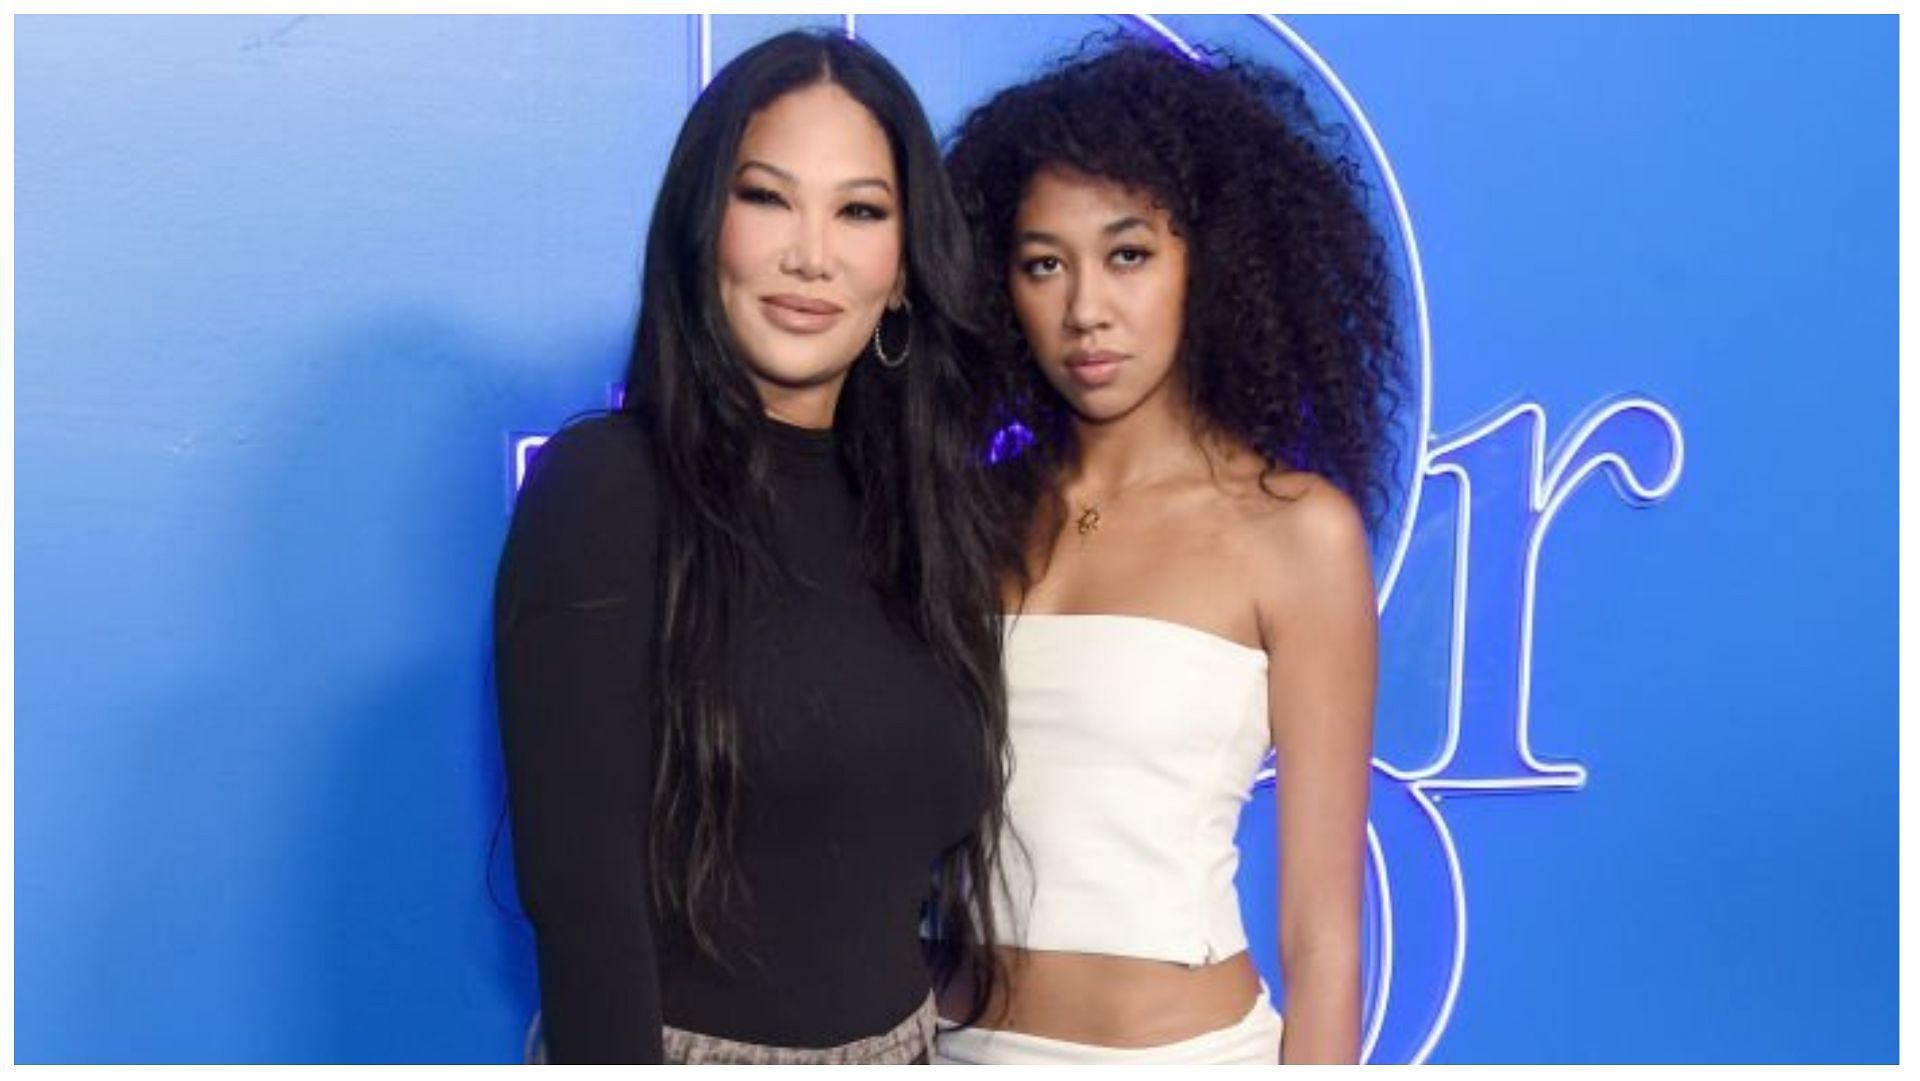 Kimora supports her daughter Aoki's decision to pursue modeling while attending college (Image via Gregg DeGuire/Getty Images)